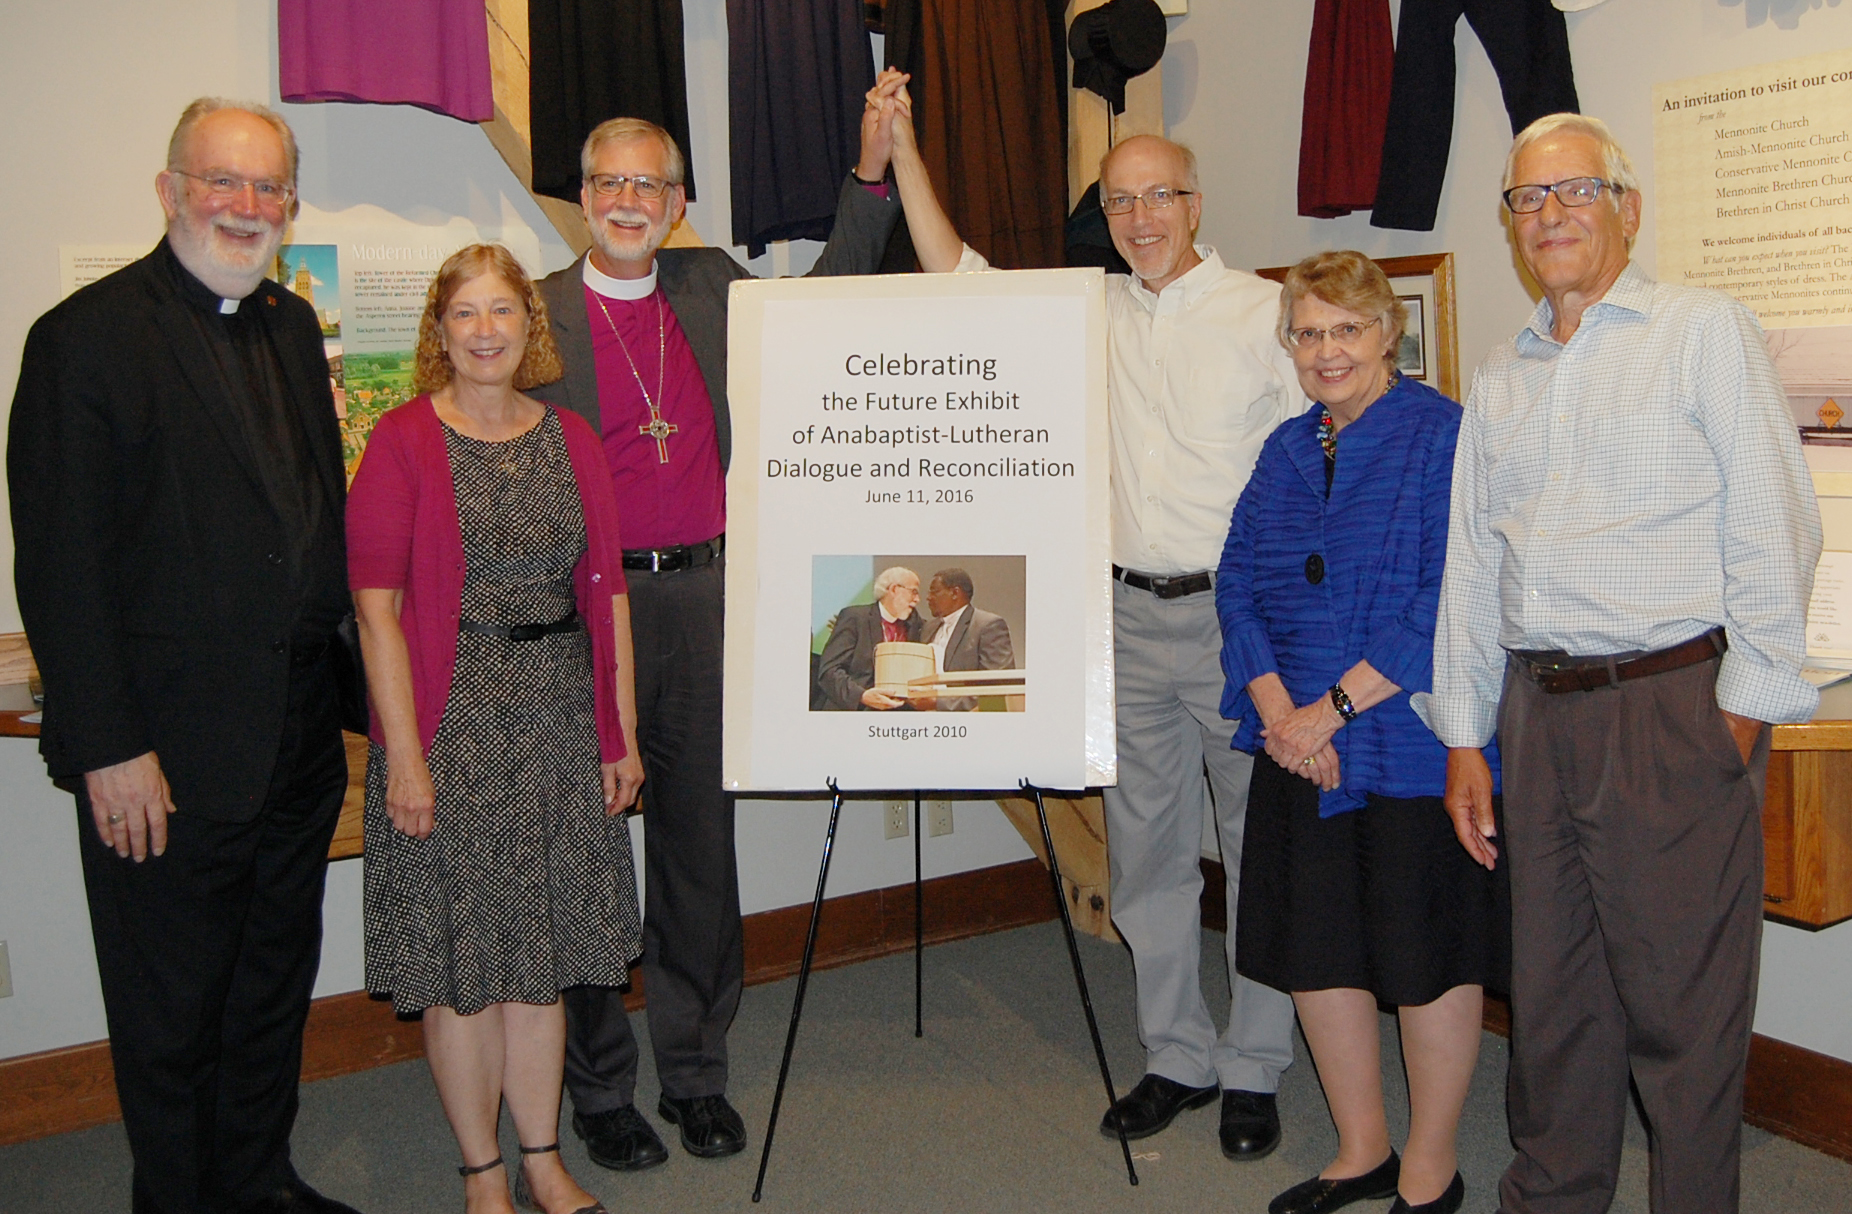 (l. to r.) Rev. Chris Boerger, secretary of the Evangelical Lutheran Church in America (ELCA); Gayle Gerber Koontz, Mennonite member of the Mennonite Church USA – ELCA dialogue group, 2002–04; Bishop Bill Gafkjen, ELCA Indiana-Kentucky Synod; J. Nelson Kraybill, president of Mennonite World Conference and pastor at Prairie Street Mennonite Church in Elkhart; Kathryn Johnson, director of ecumenical and inter-religious relations of the ELCA; and Joe Yoder, volunteer and former Menno-Hof director; participated in a Lutheran-Mennonite tour of the Menno-Hof Amish-Mennonite Information Center in Shipshewana, Indiana, on June 11. (Photo by Leslie French, Indiana-Kentucky Synod Communicator)